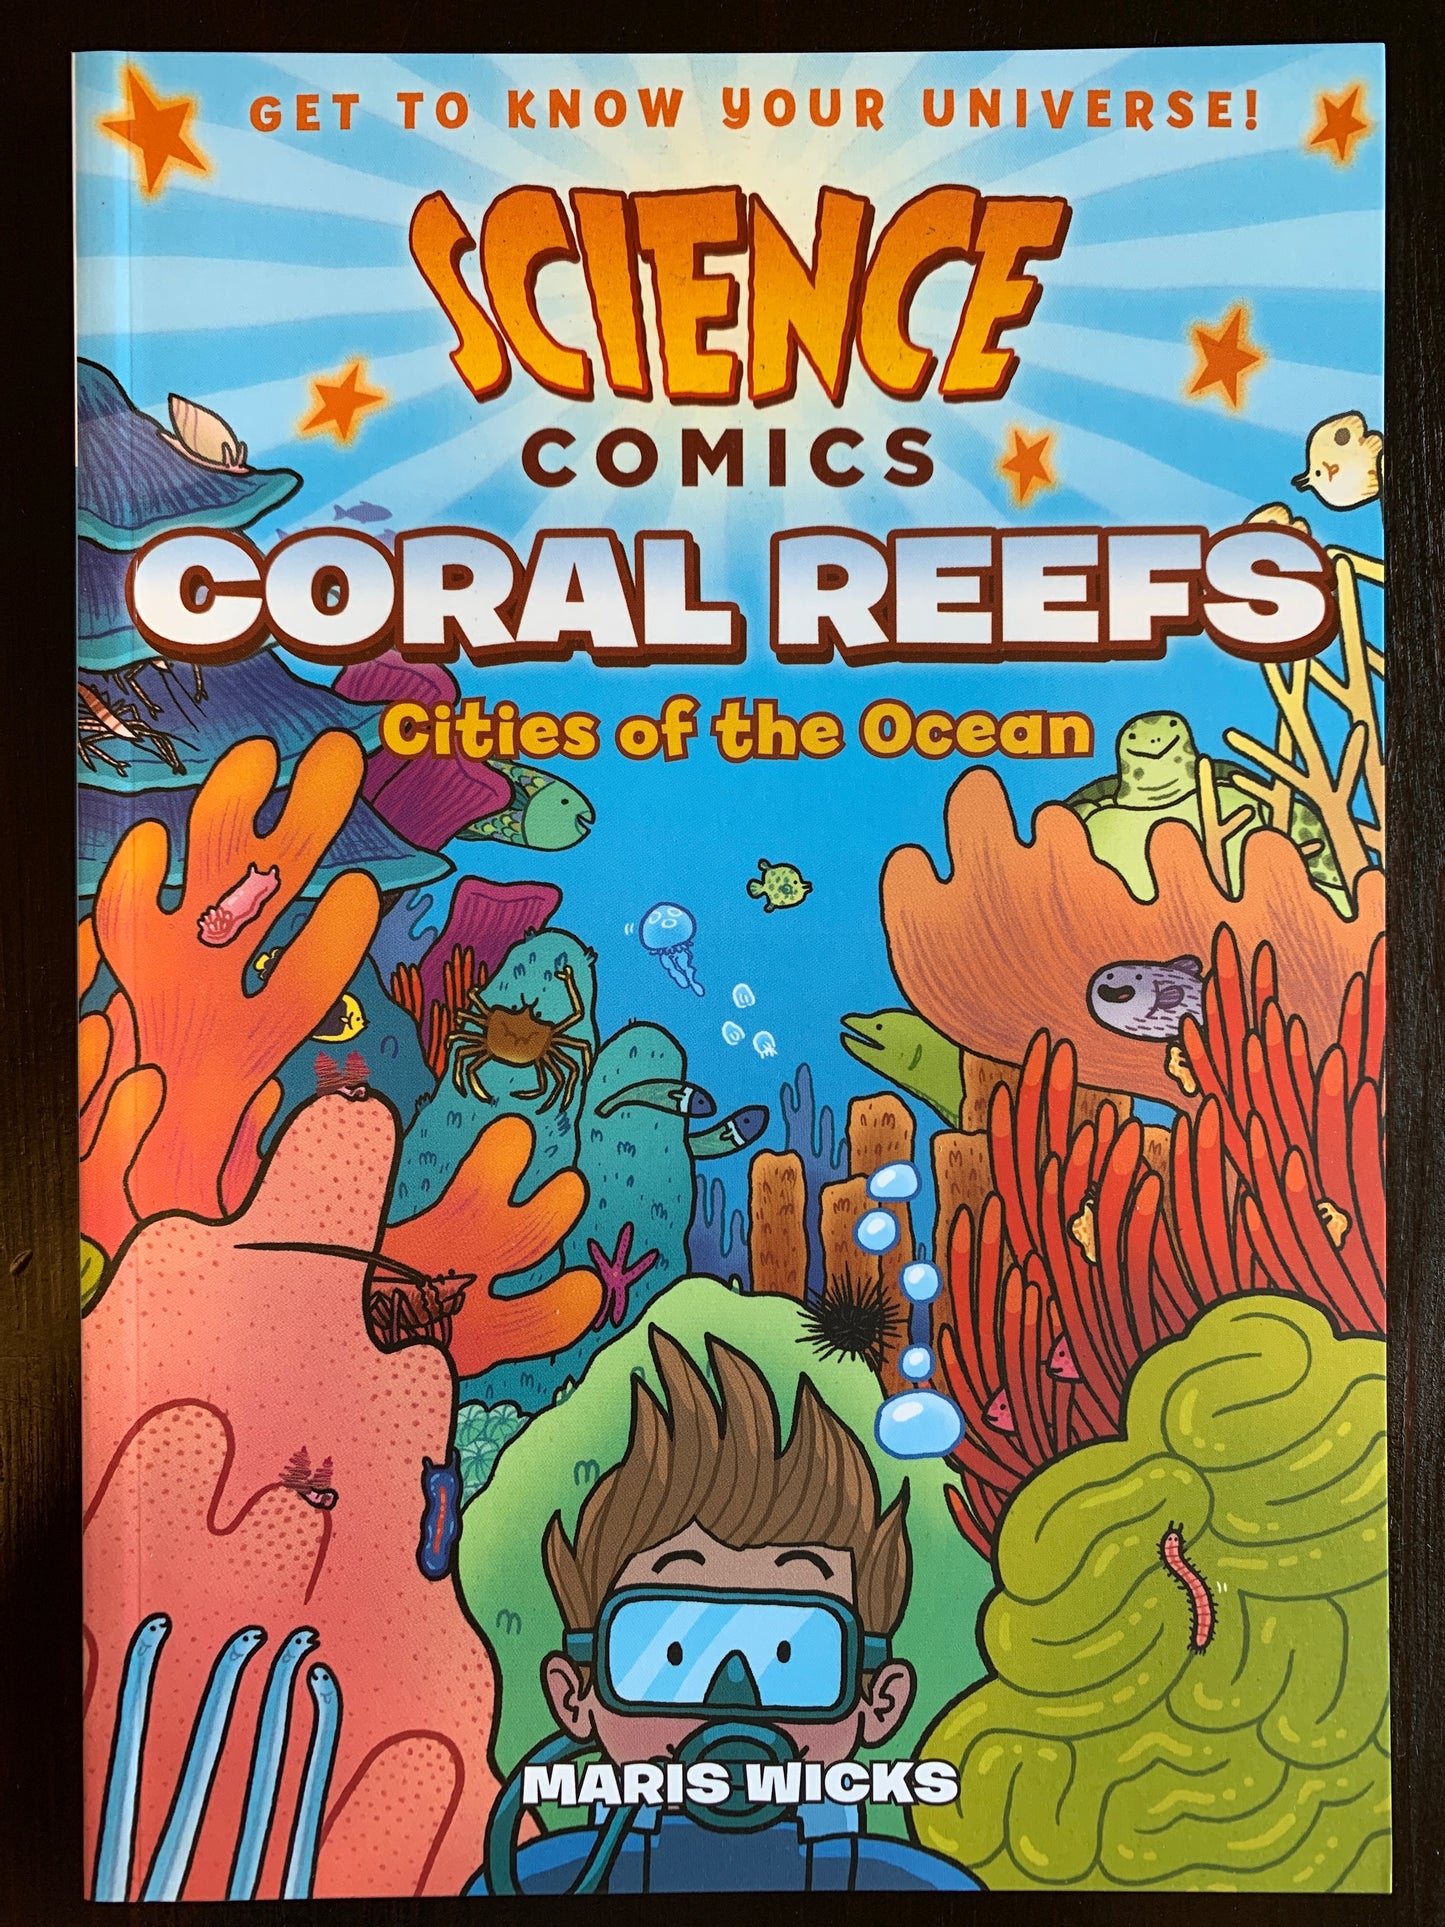 Science Comics: Coral Reefs, Cities of the Ocean